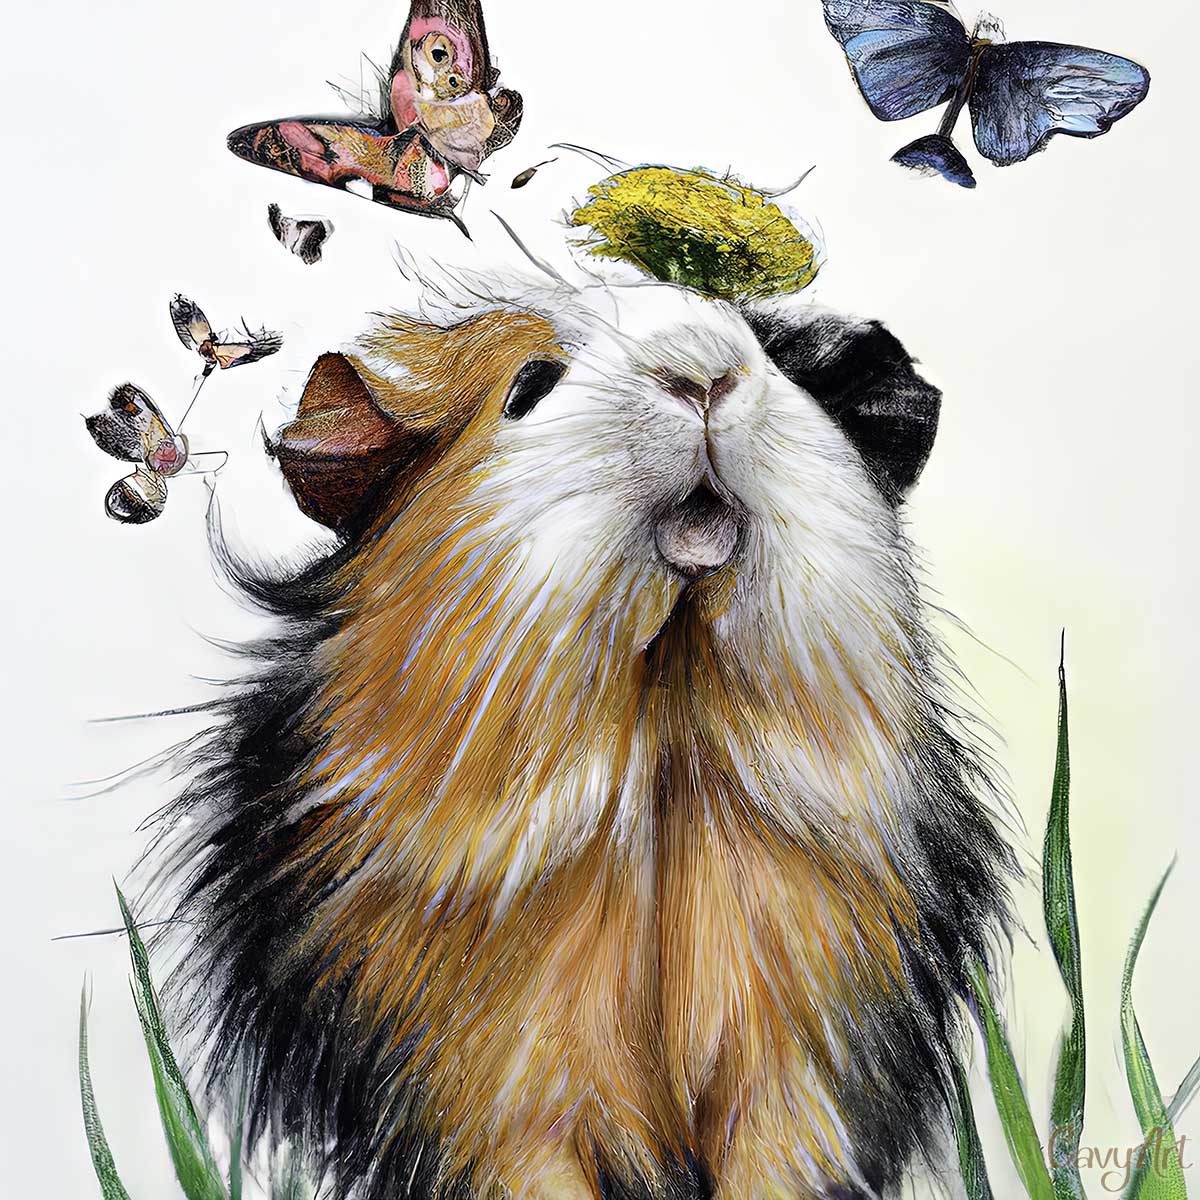 Guinea pig looking up at butterflied illustration from CavyArt